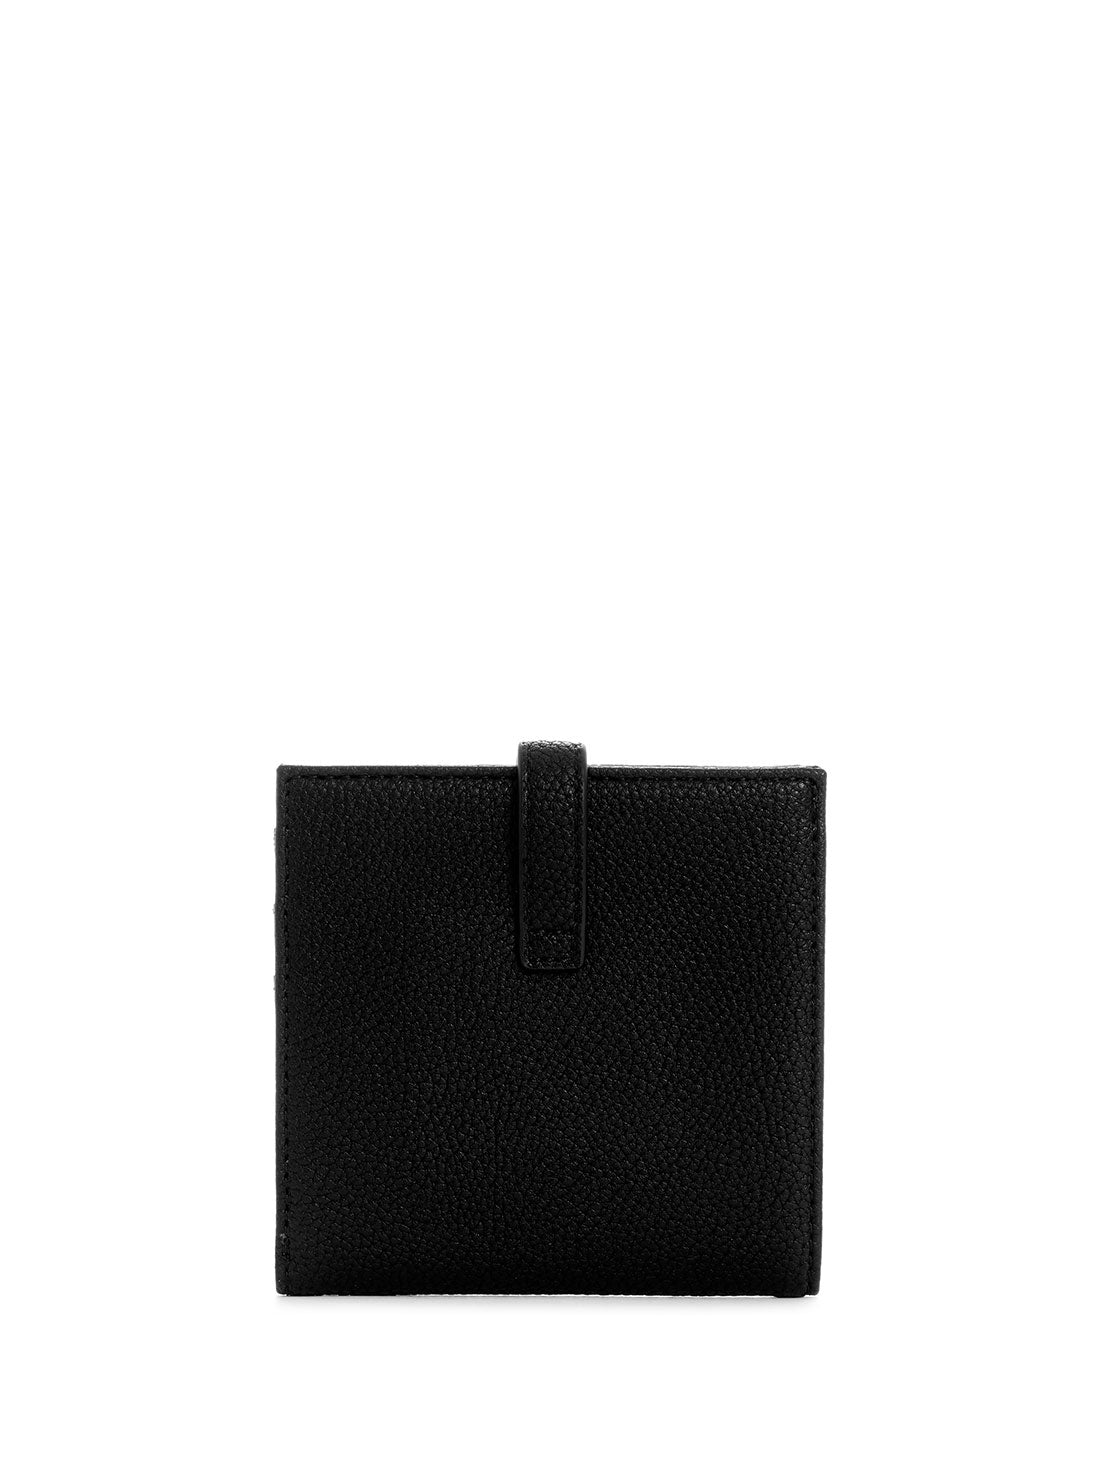 Black Laurel Small Card Case back view